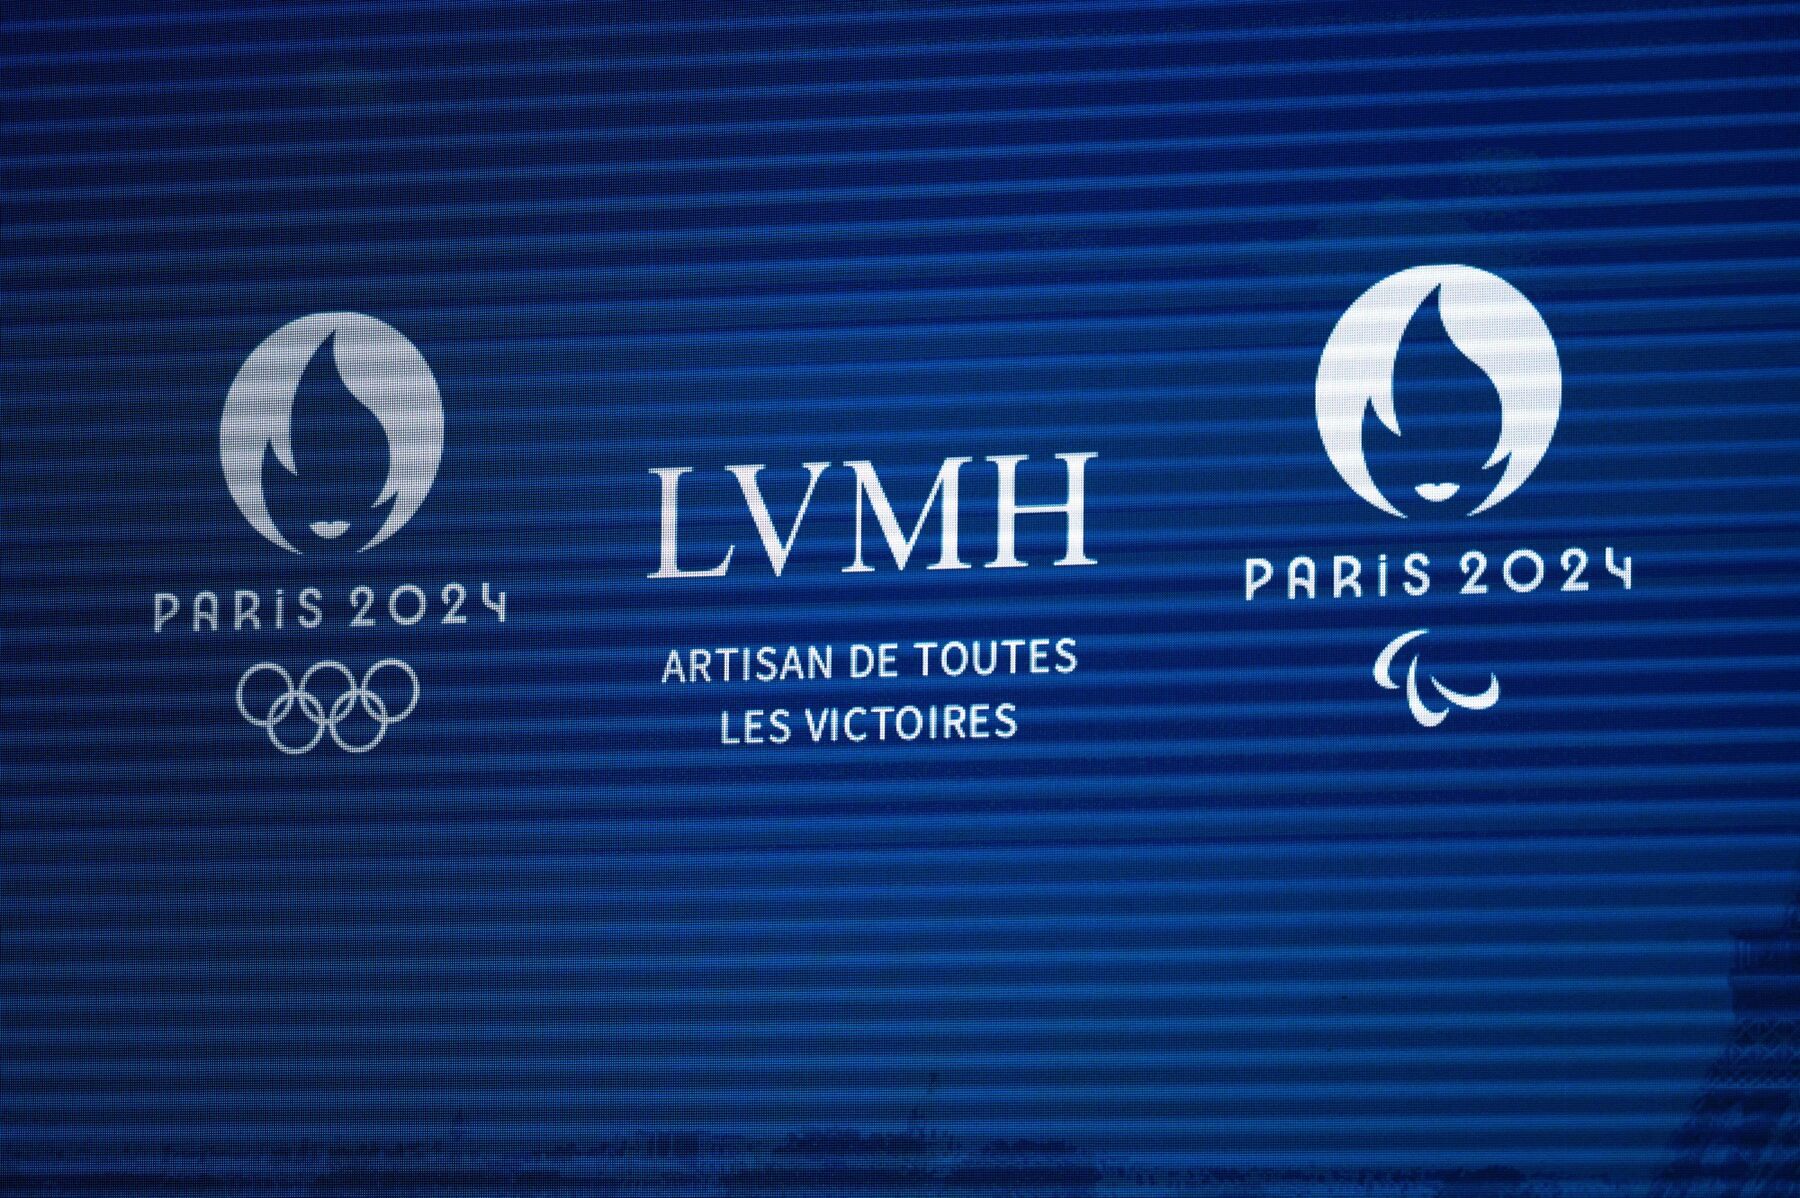 Paris 2024 Olympics: LVMH to Sponsor Olympics in a First for Luxury ...